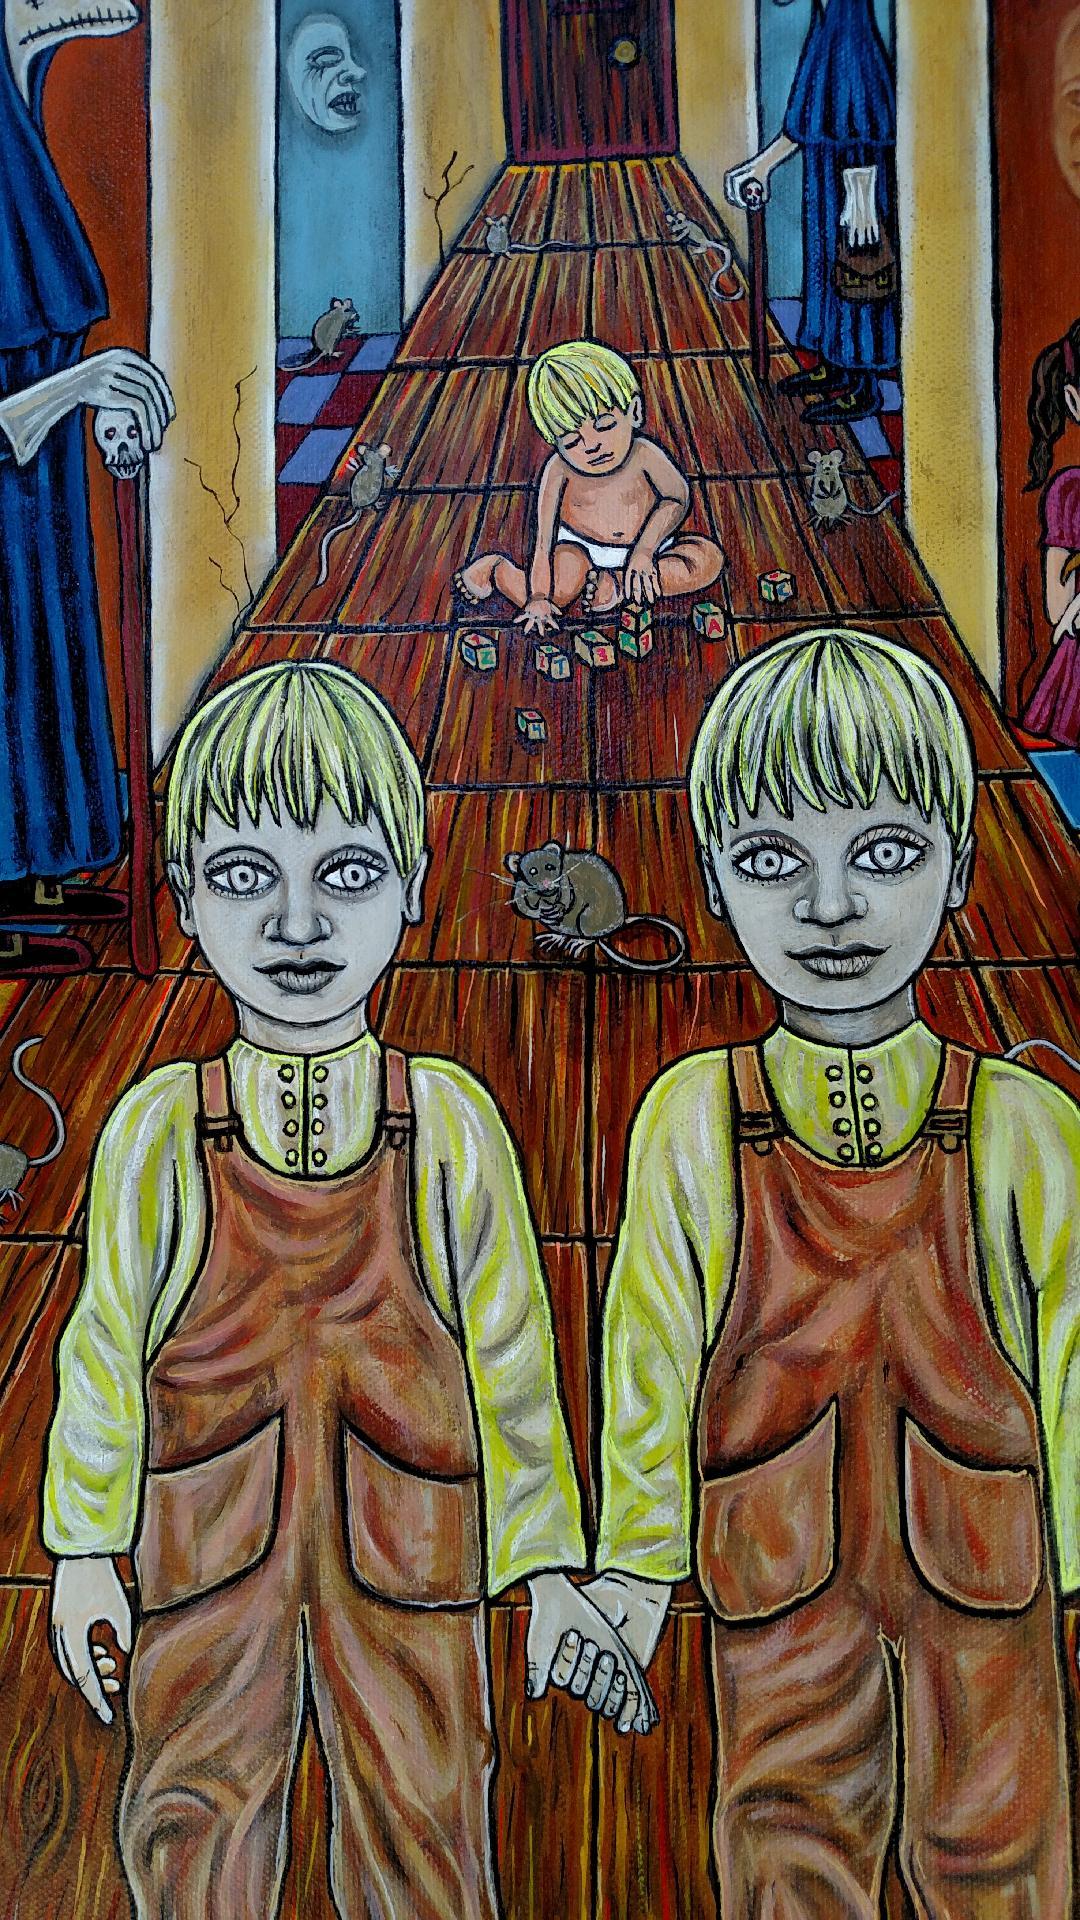 <p>Artist Comments<br>This painting was inspired by the movie The Shining and the twins holding hands in a hallway.</p><p>About the Artist<br>Beatriz’s paintings are finely executed depictions of the bizarre. Hovering between the categories of